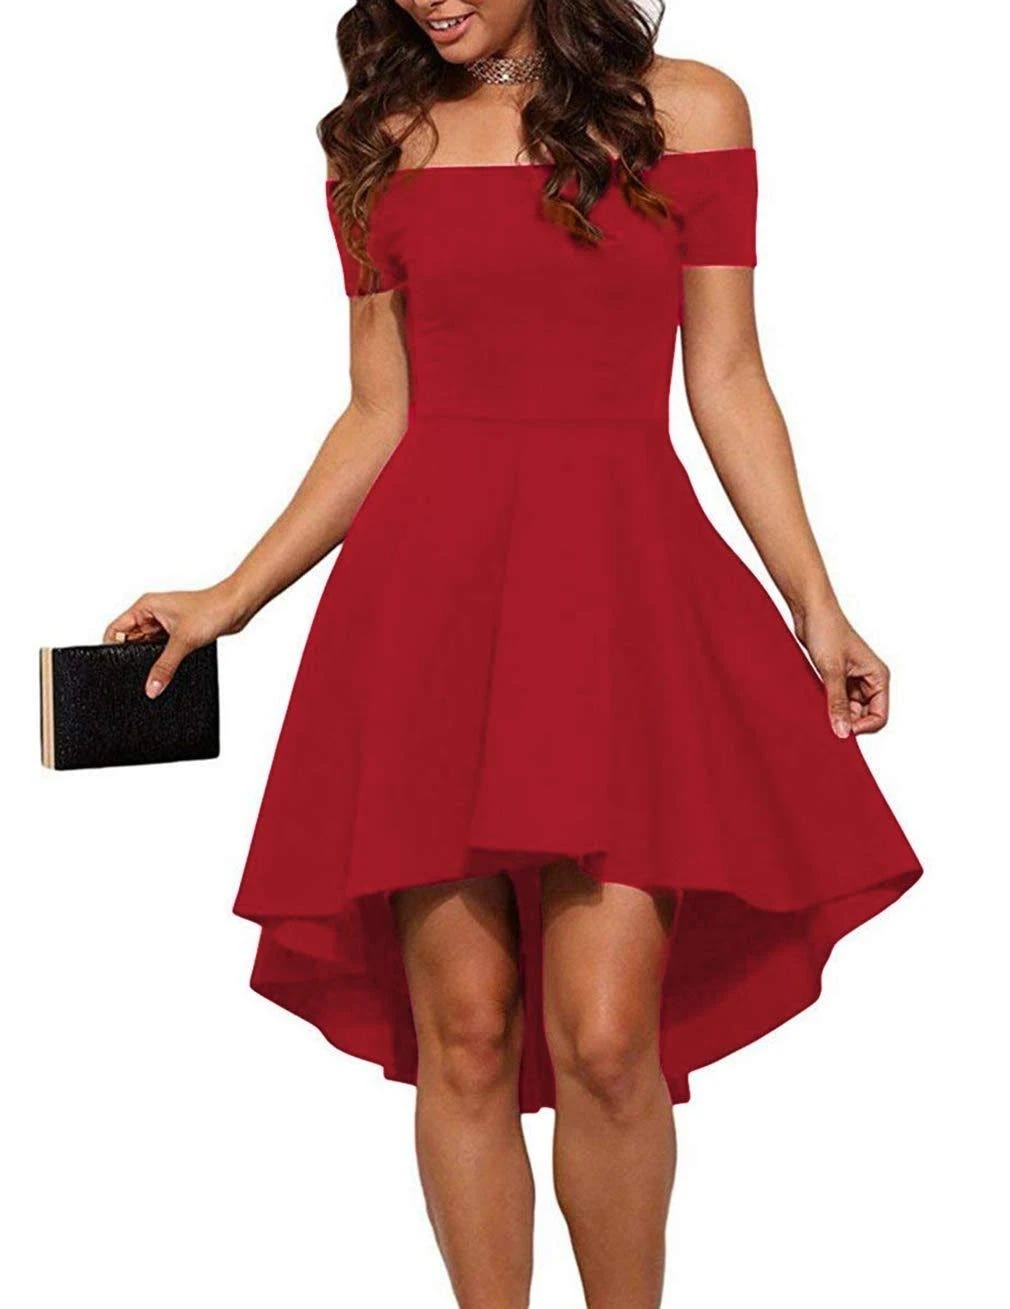 Off-Shoulder Skater Dress: Stylish and Comfortable for Cocktail and Party Events | Image